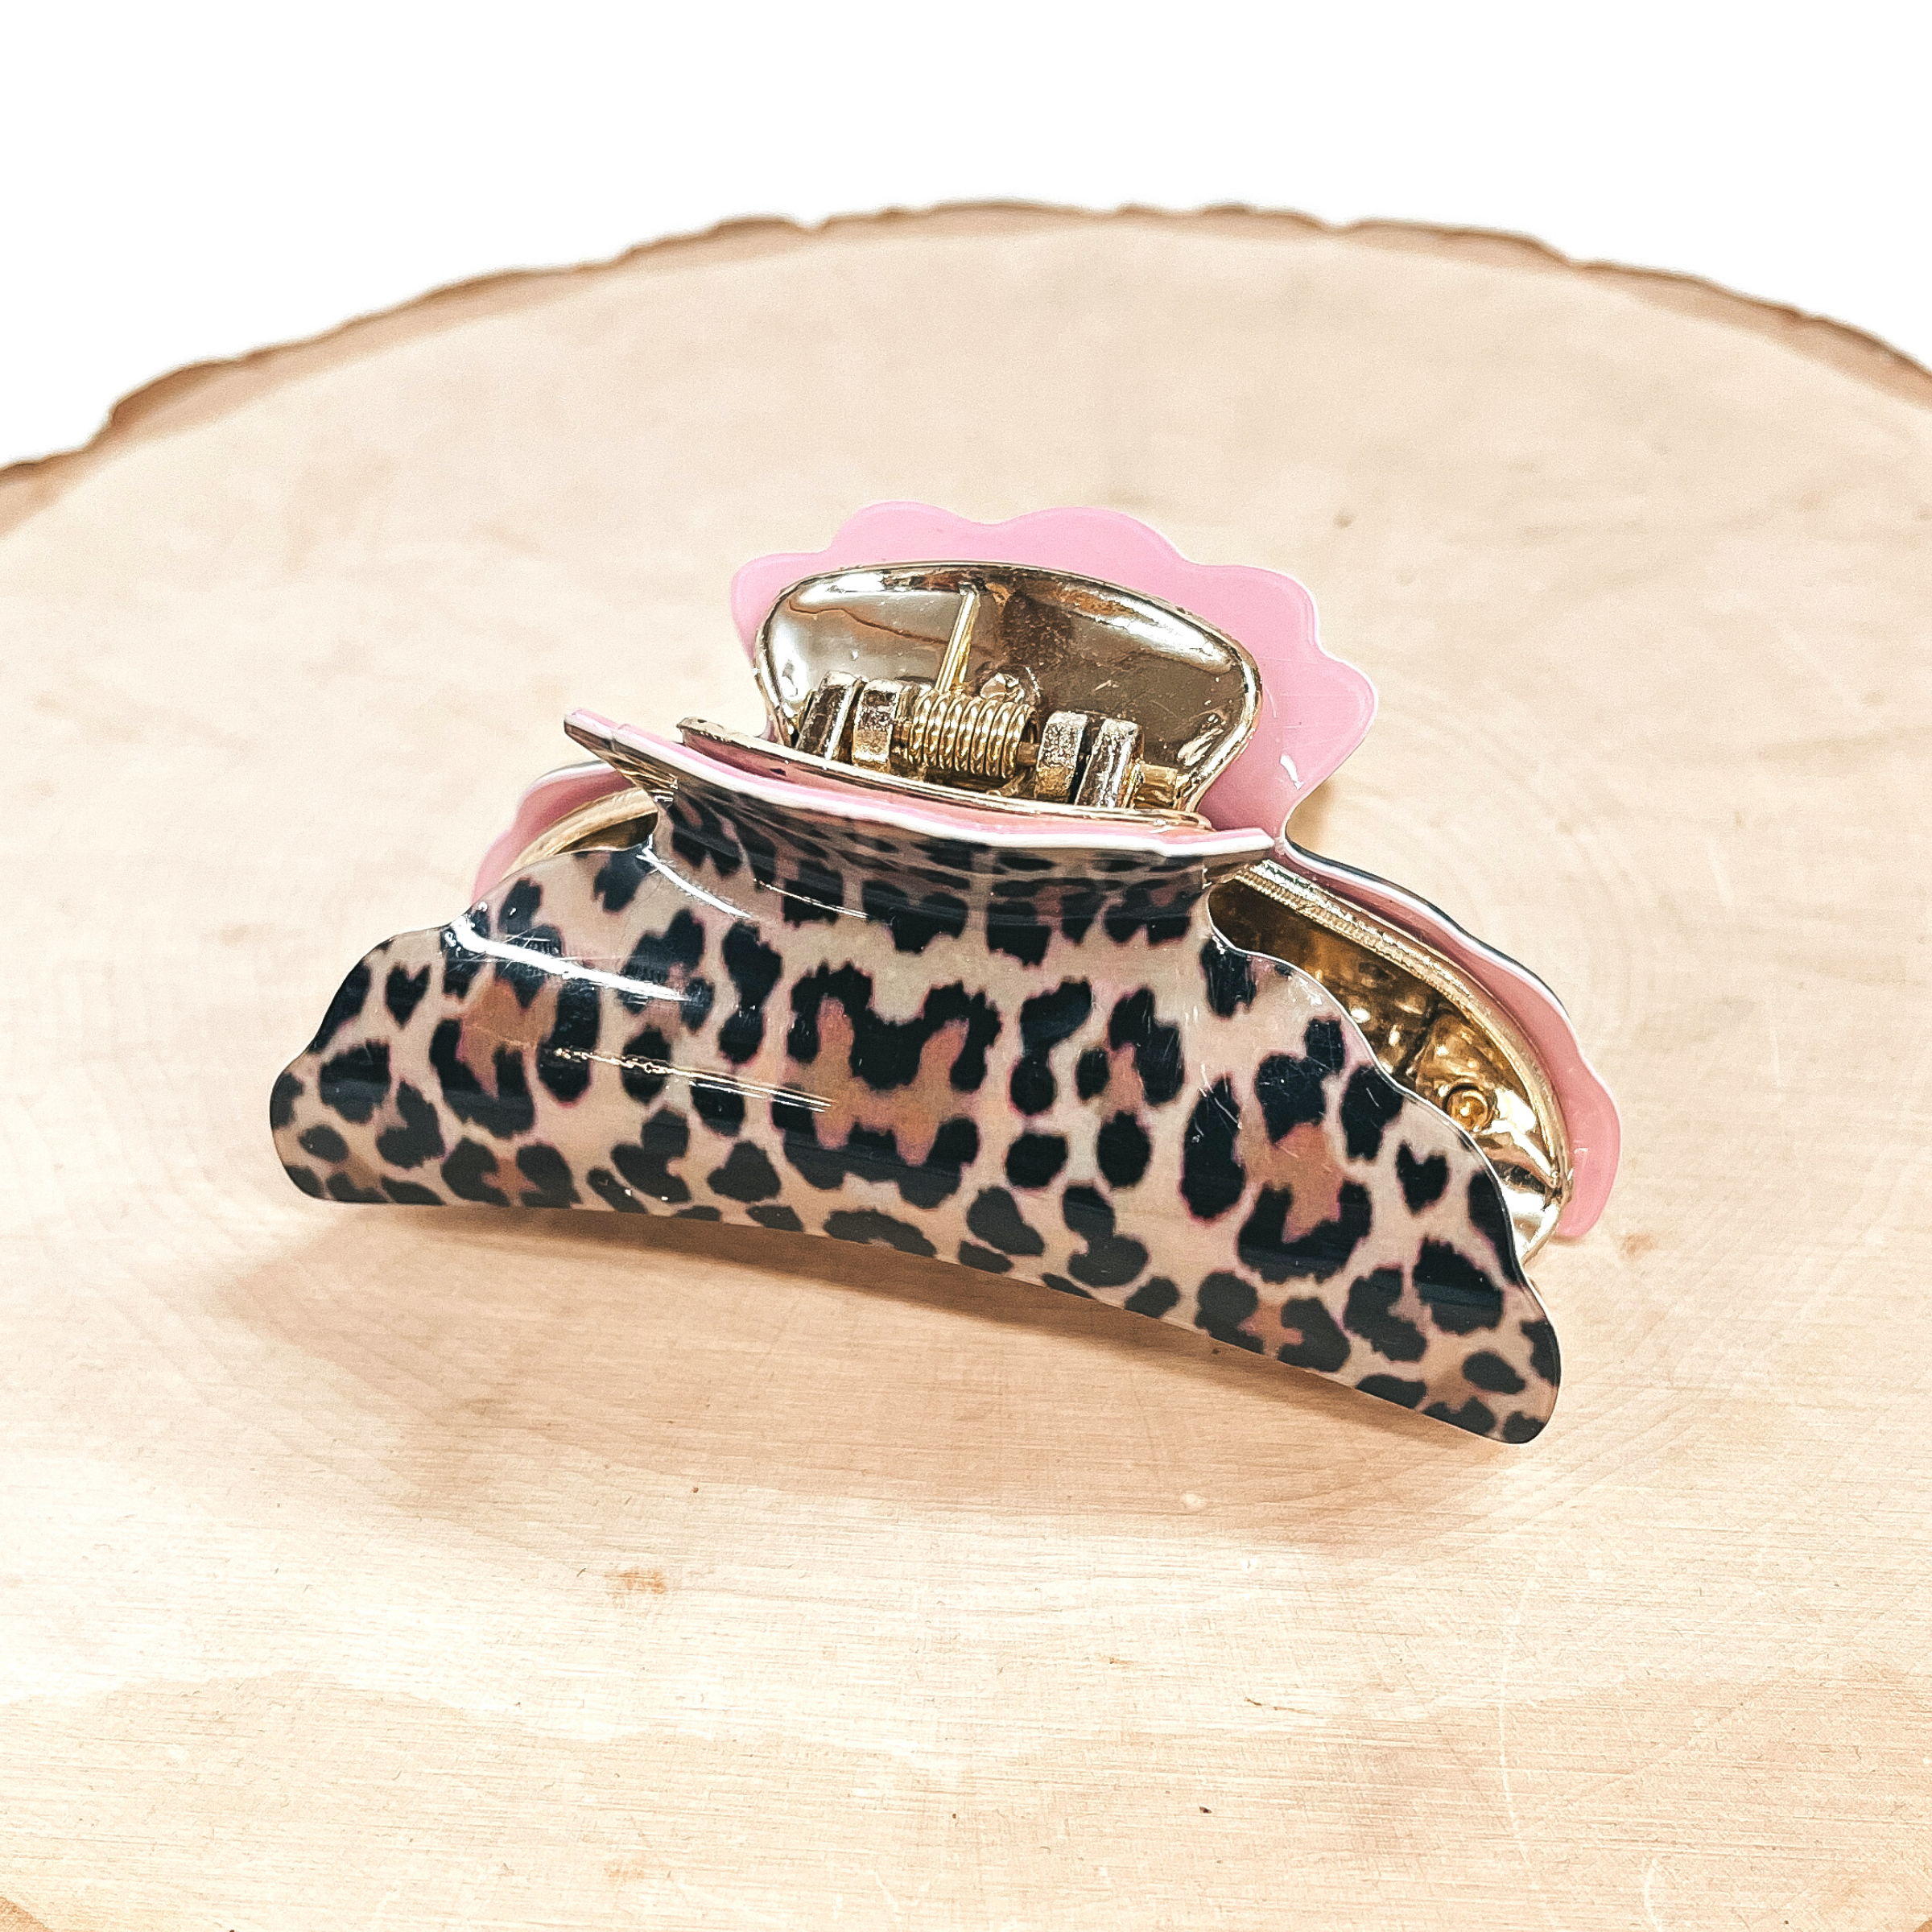 This is a light brown leopard print hair clips in light pink in a gold tone inlay.  This hair clip is  taken on a slab of wood and white background.